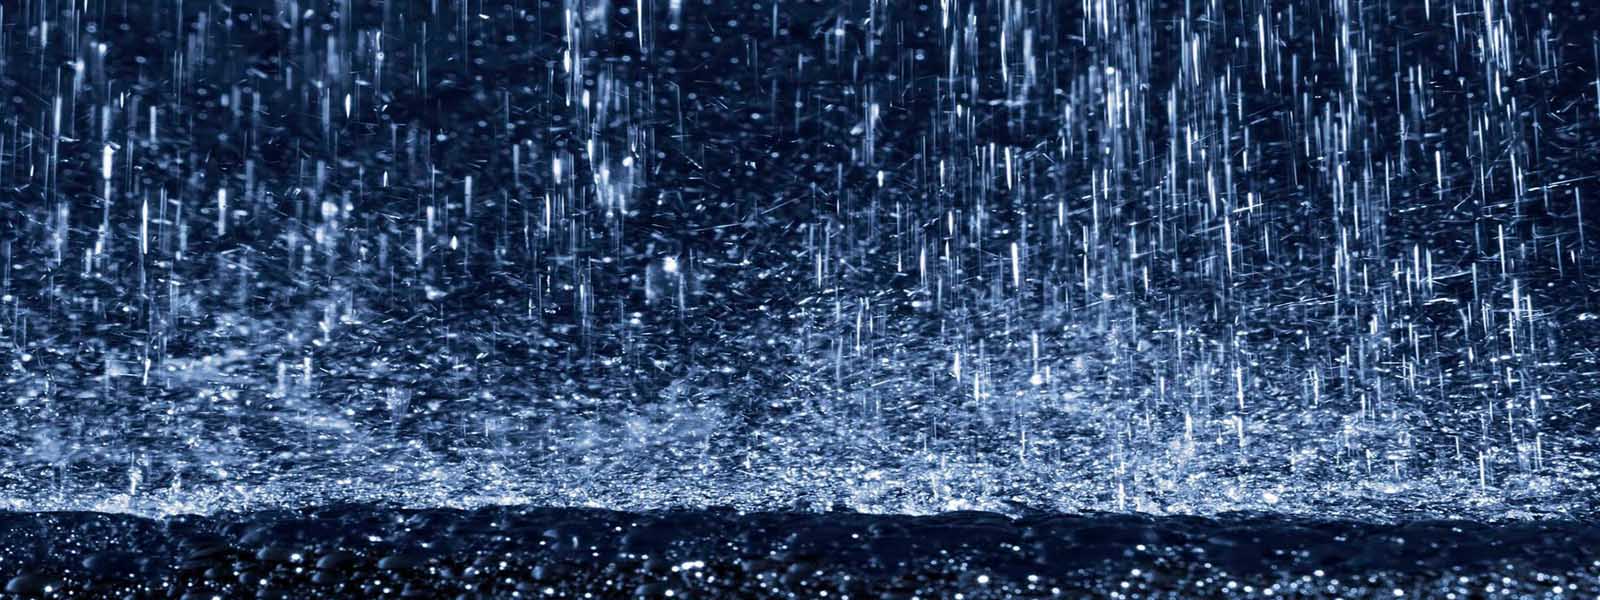 Heavy showers expected in several regions